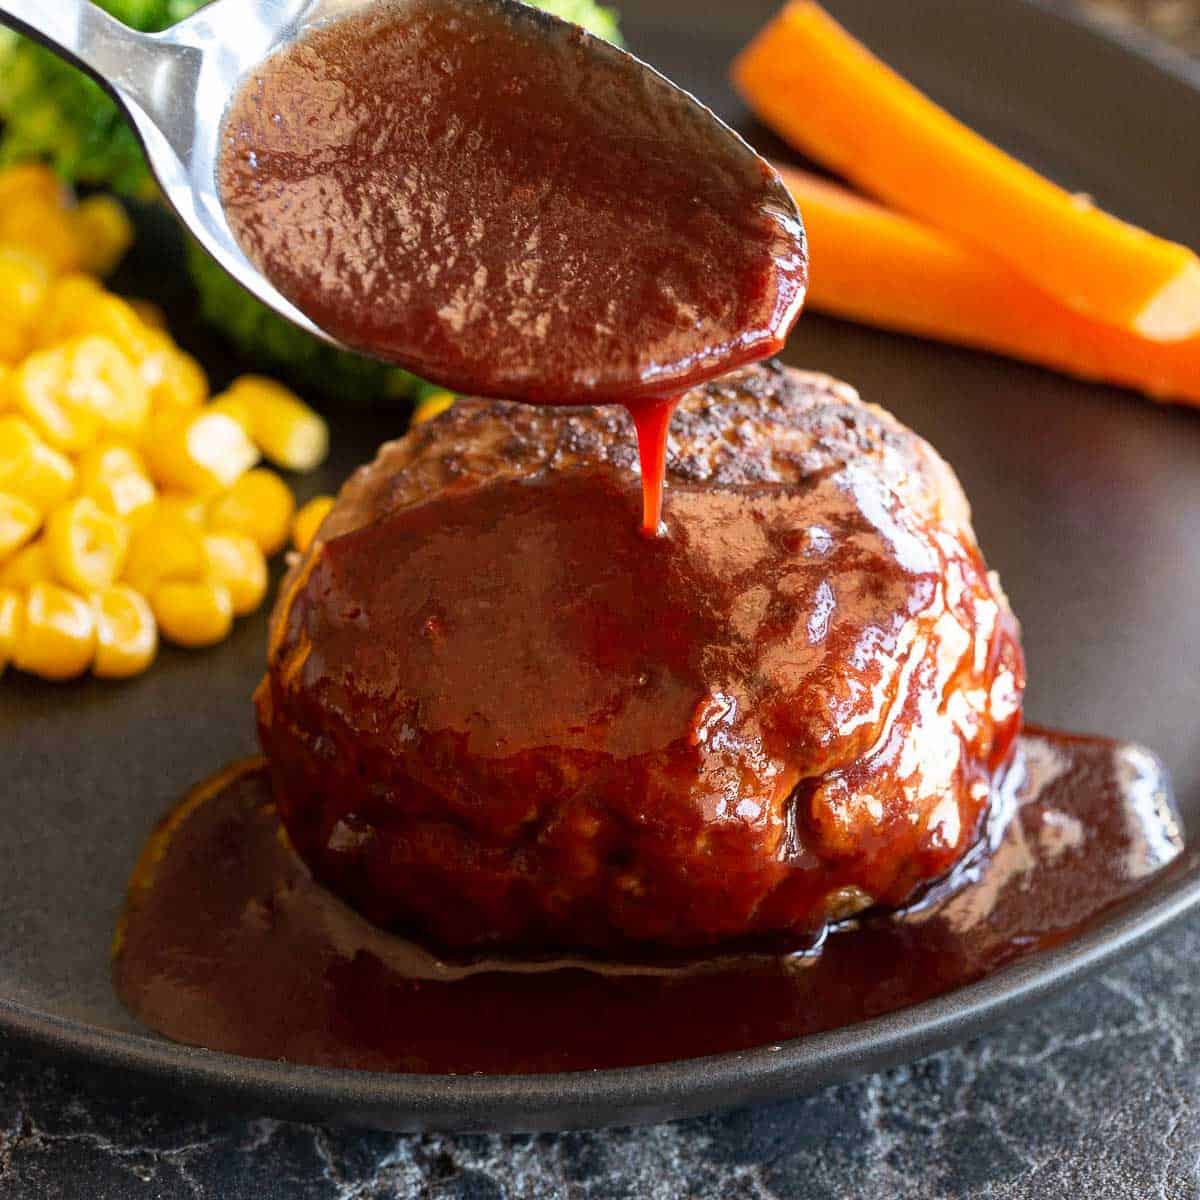 A spoon pours homemade demi-glace sauce over a hamburg.